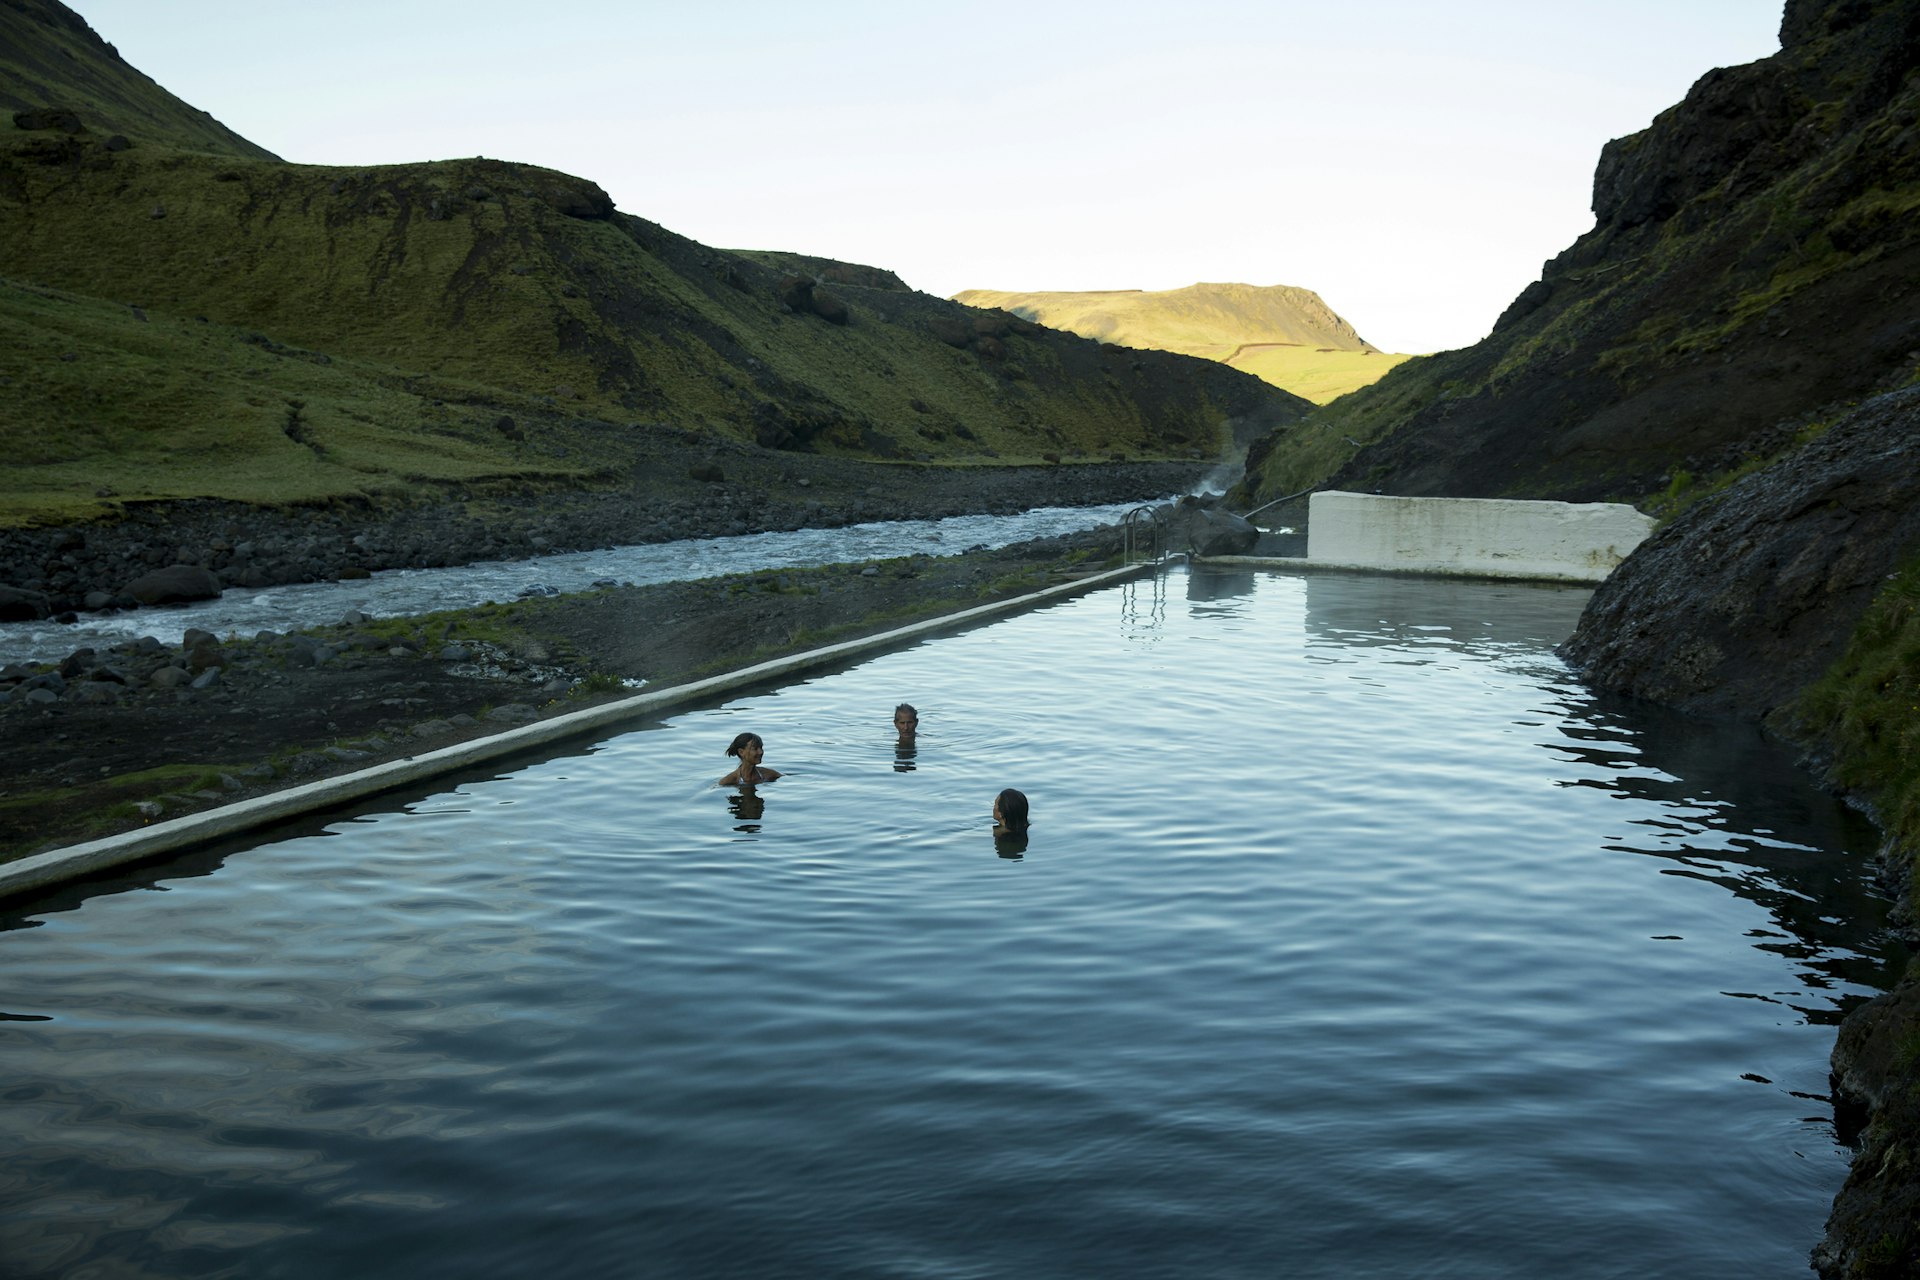 A family swimming in an outdoor pool in Iceland surrounded by rocks